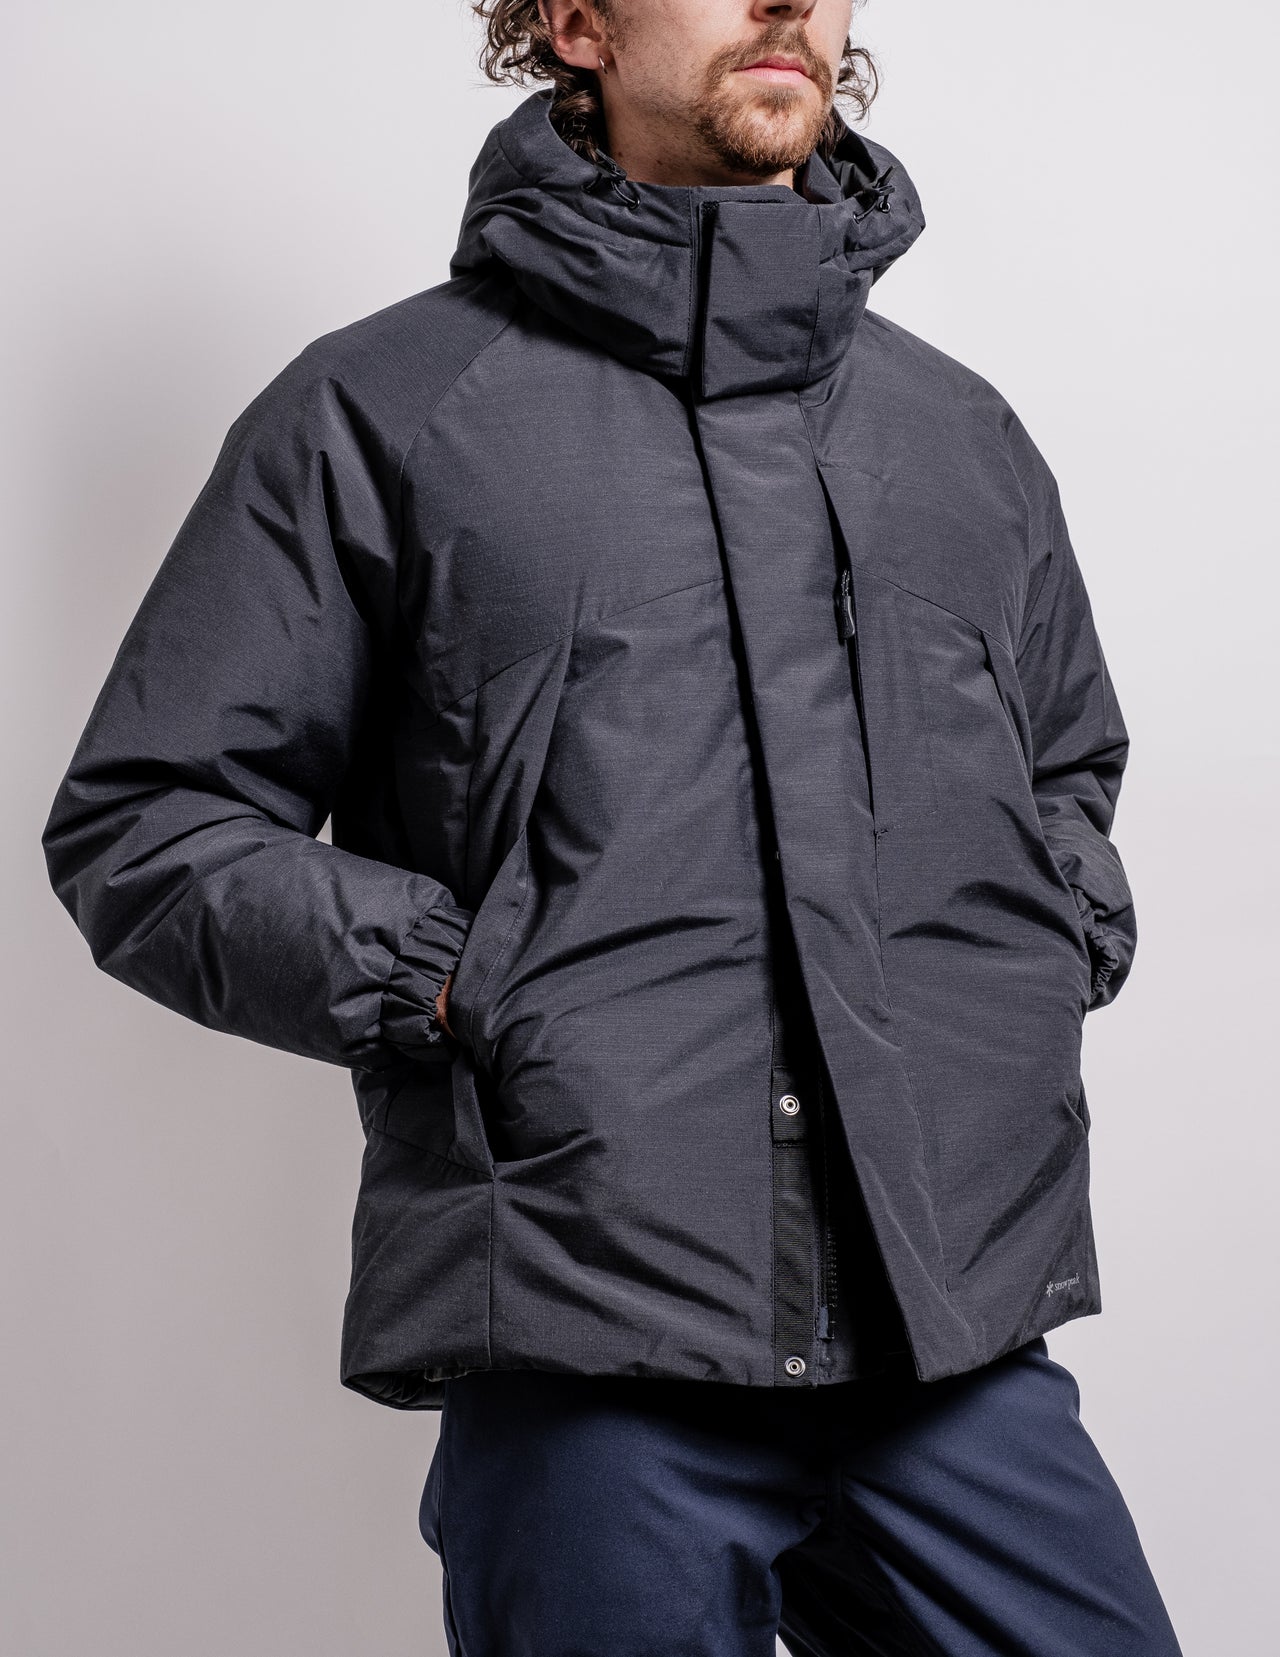 Fire-Resistant 2 Layer Down Jacket in Black